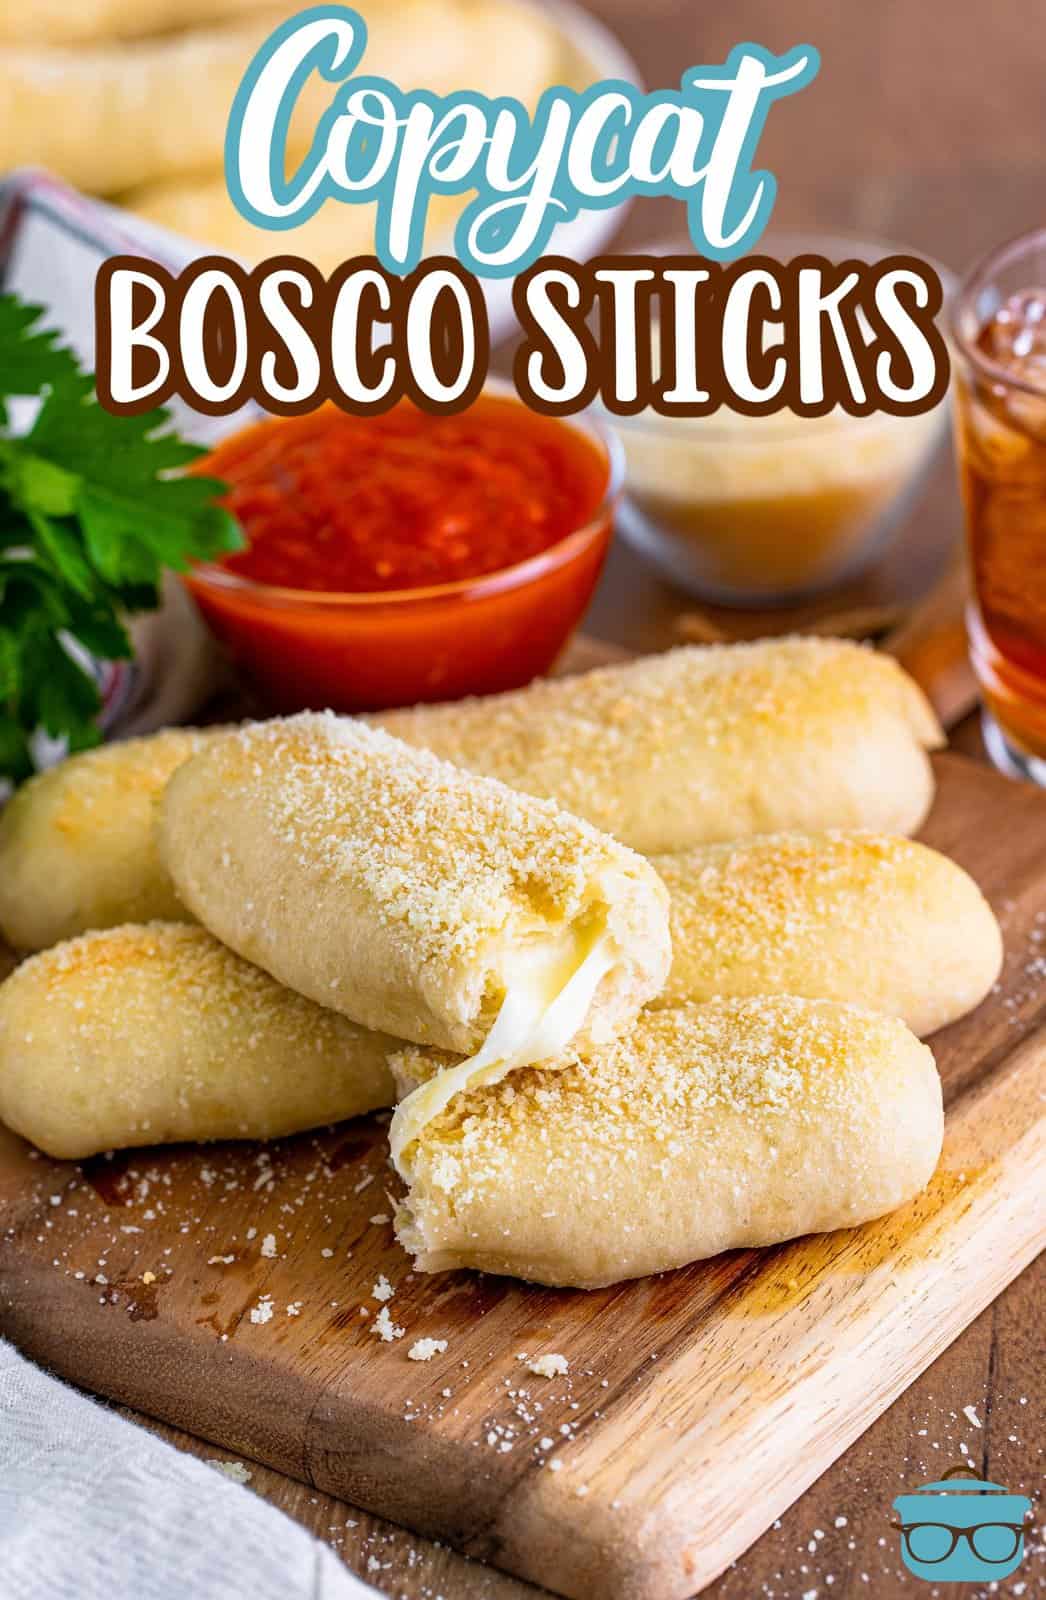 A few Bosco sticks with a broken open one resting on top on a wooden board with a small bowl of marinara sauce in the background.